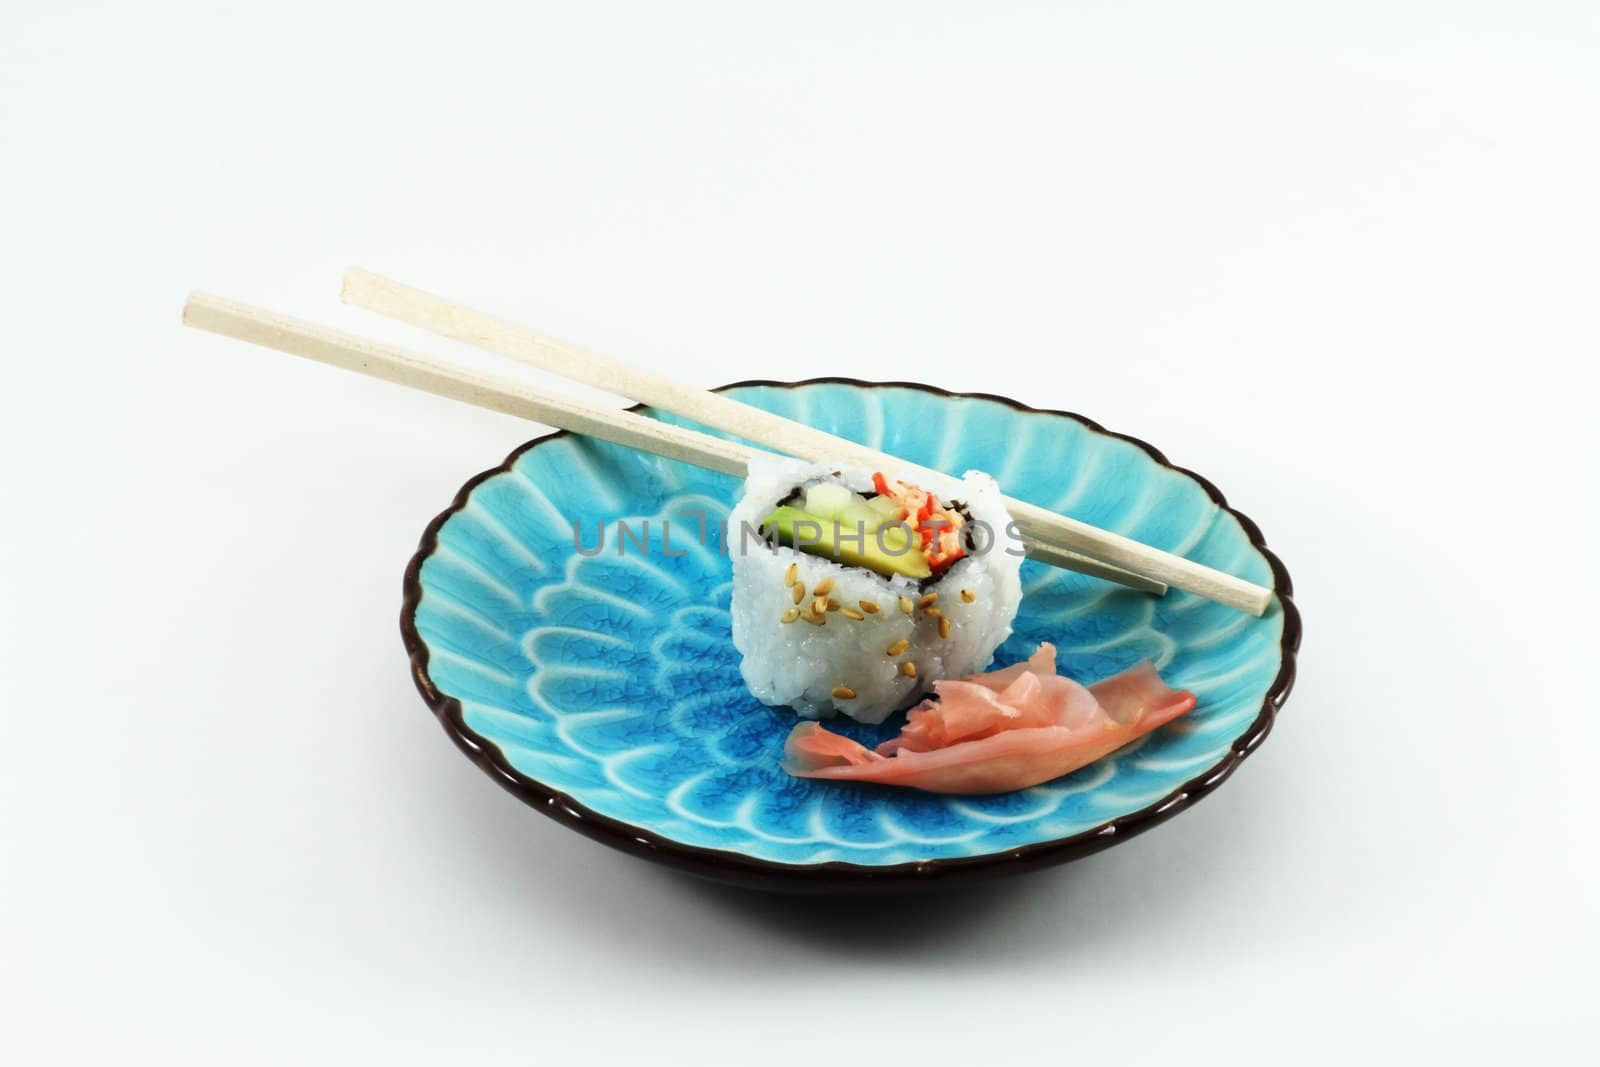 Far East table setting with chopsticks, sushi, and ginger root on a blue dish.